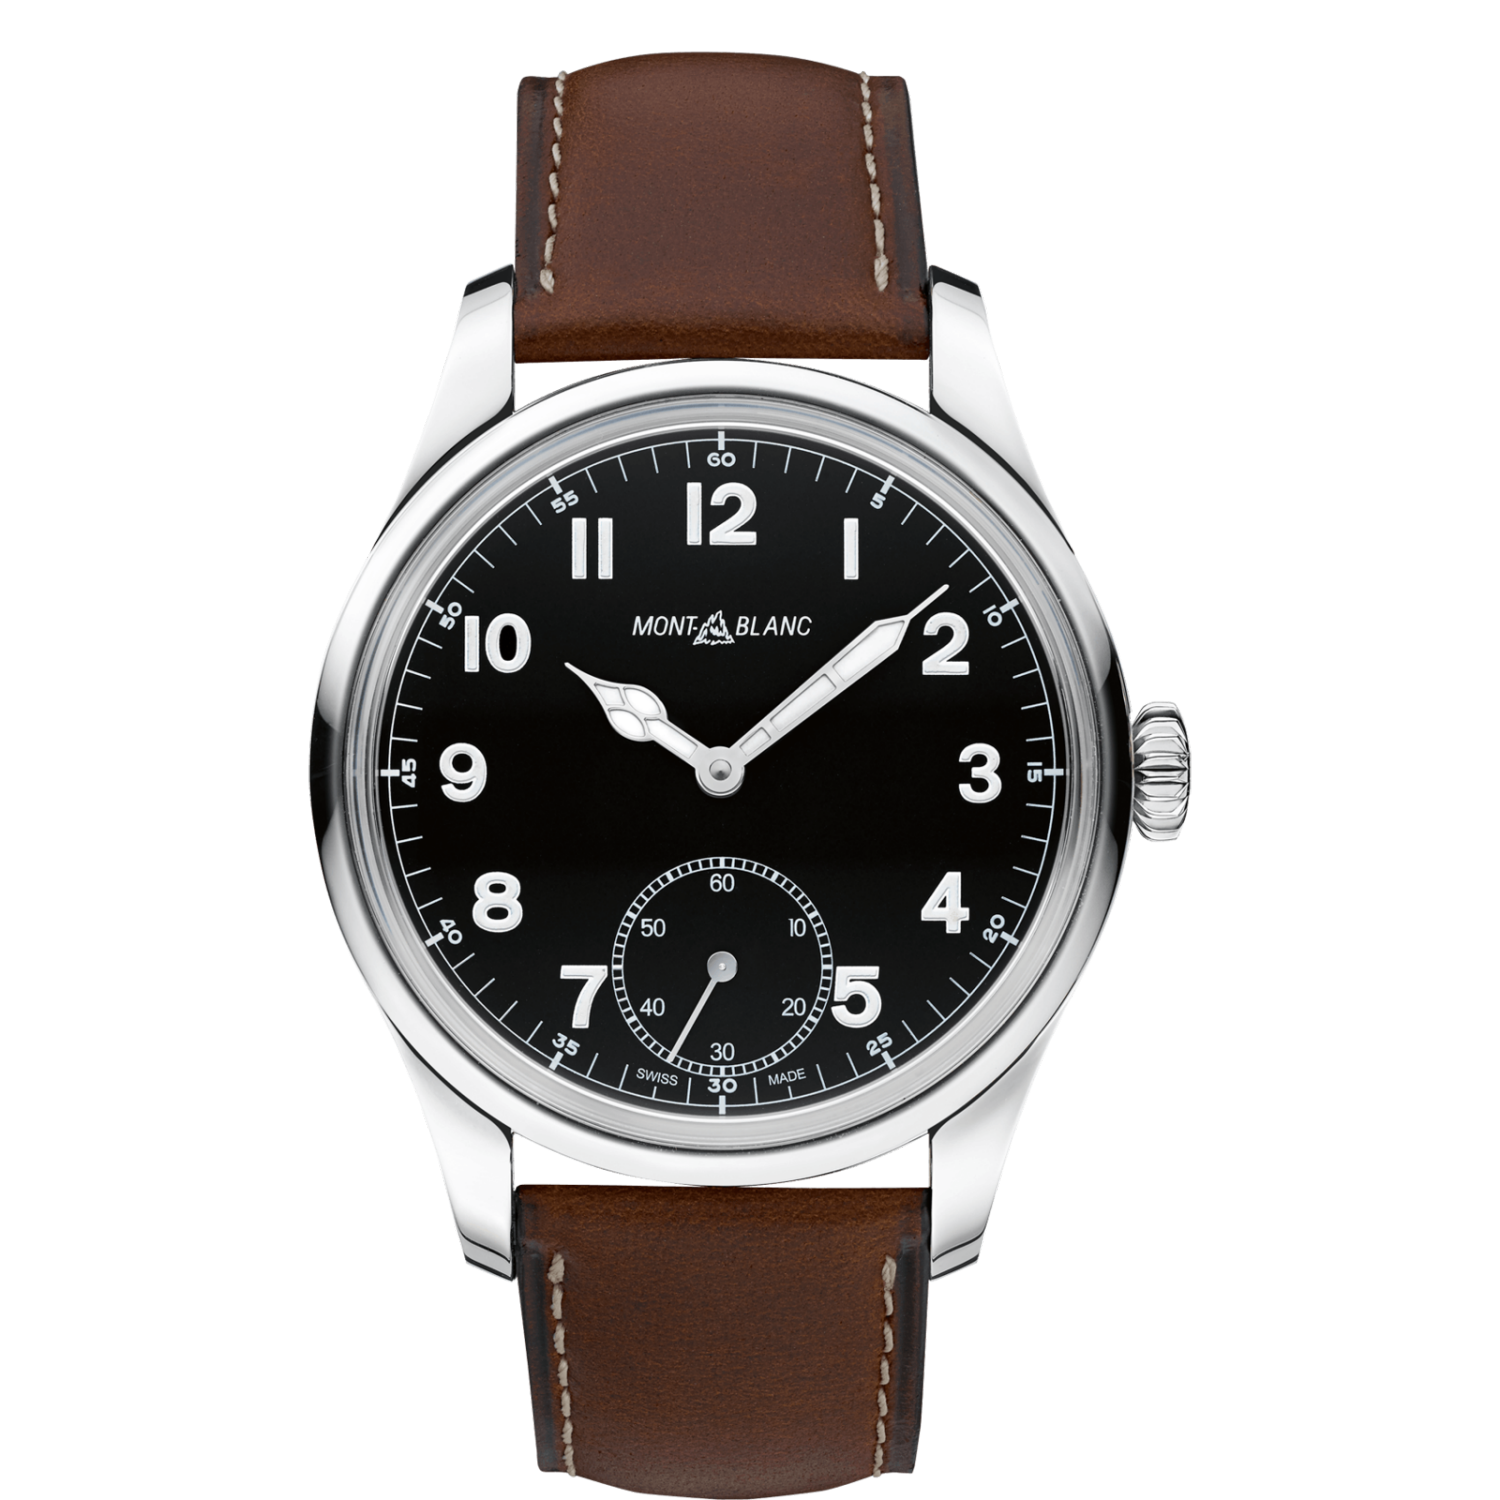 Montblanc 1858 Small second 112638 watch